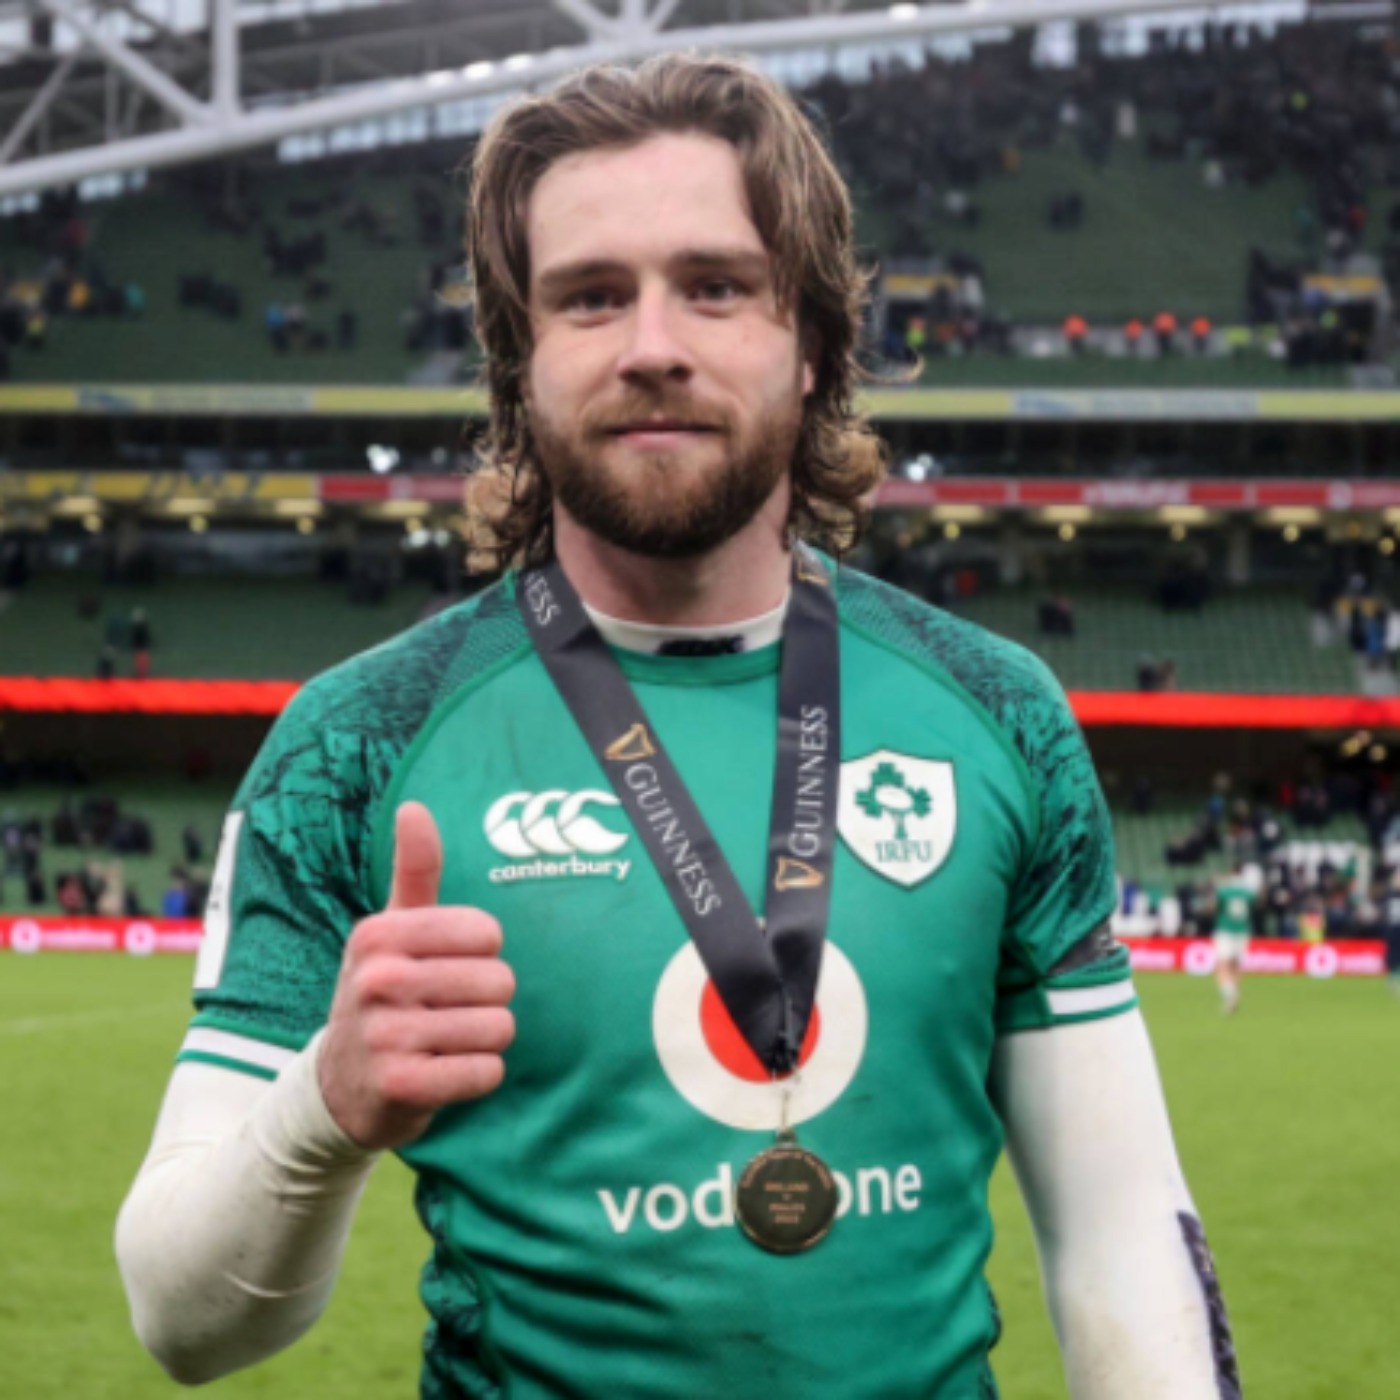 Six Nations Round 1 review